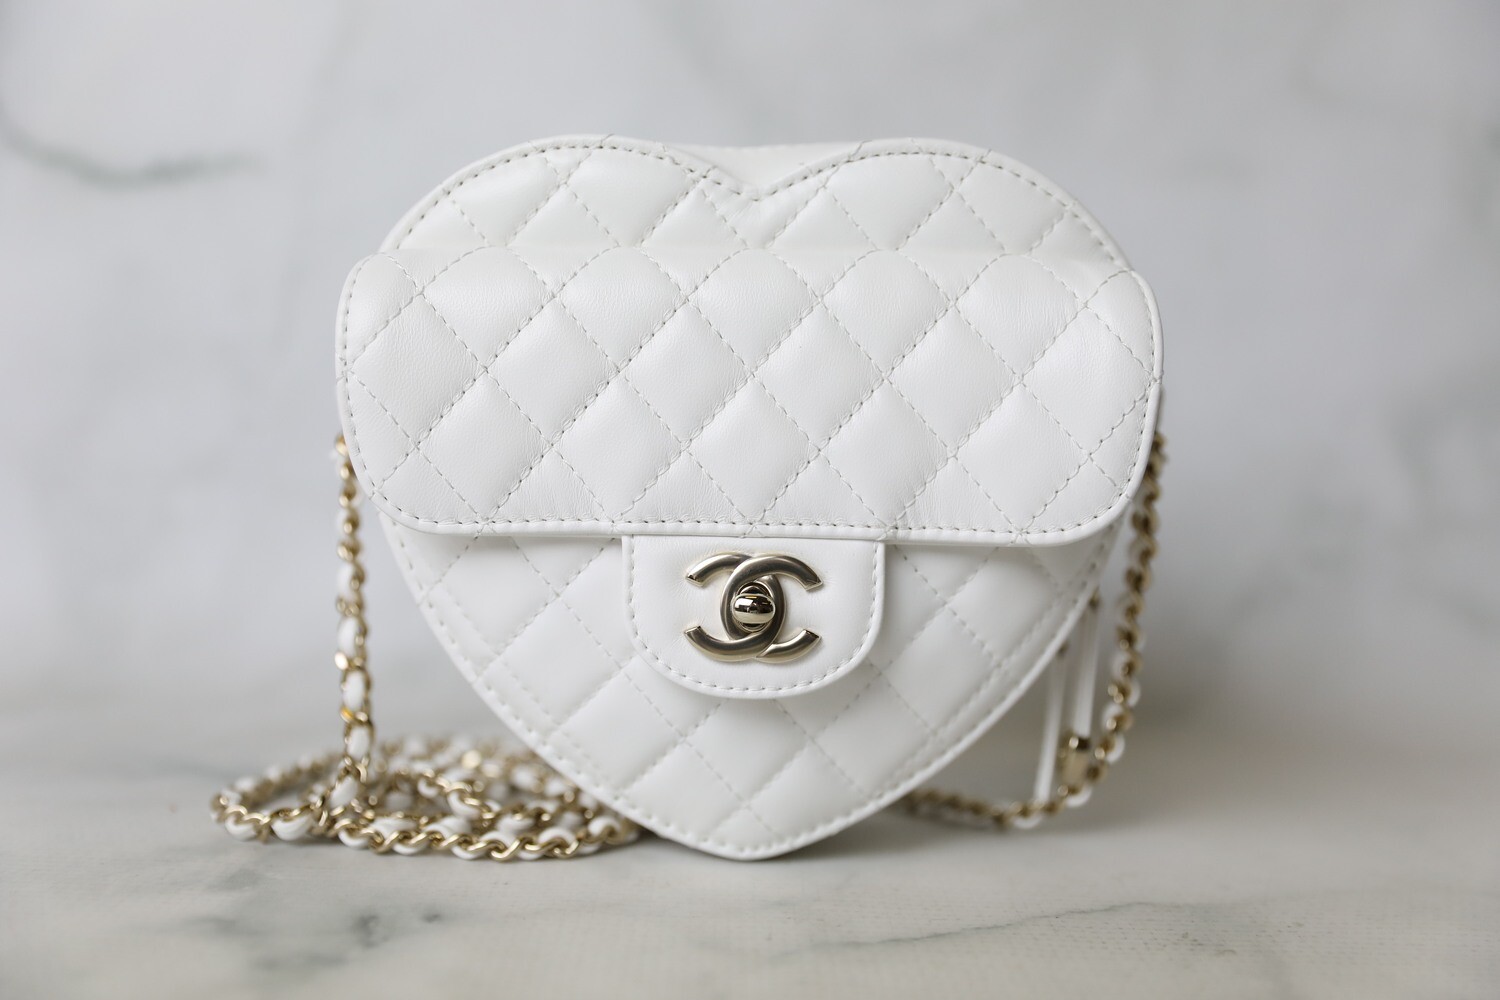 Chanel Heart Bag, Large, White Lambskin Leather, Gold Hardware, New in Box  MA001